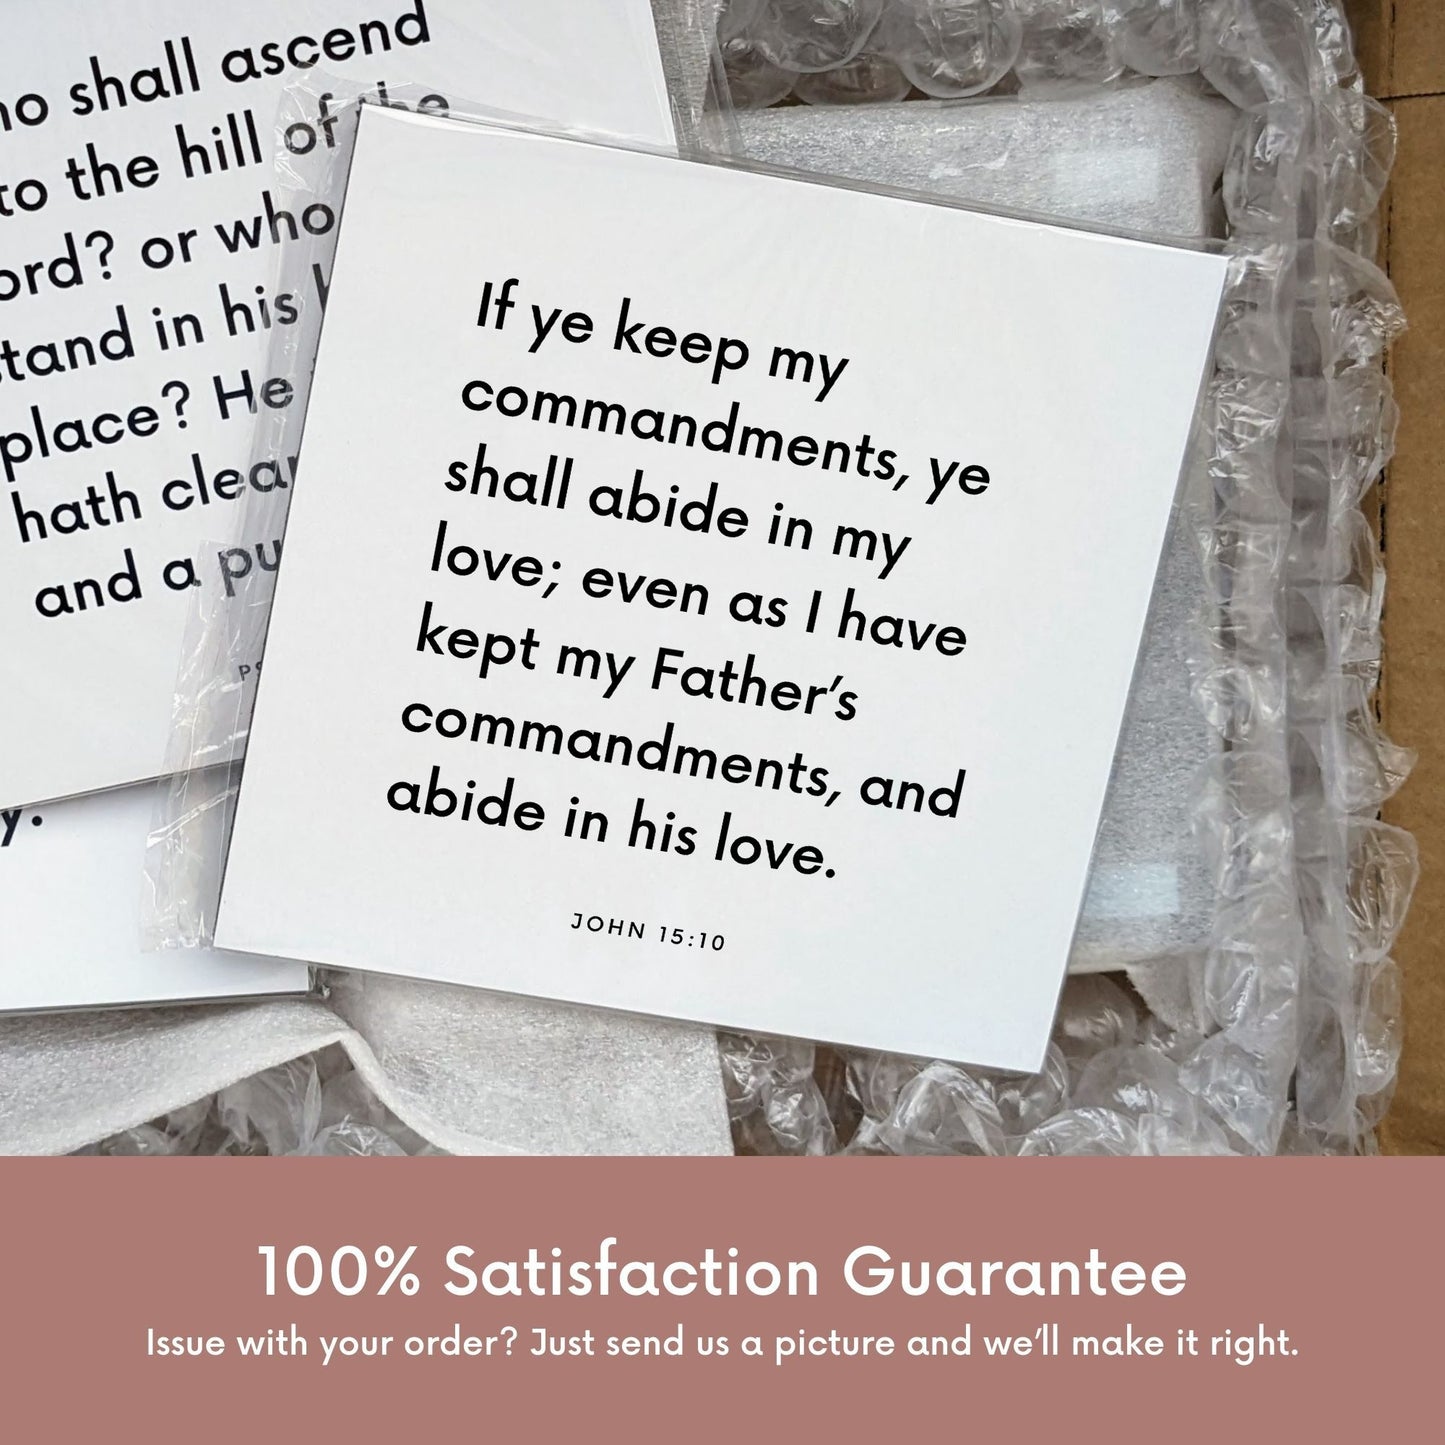 Shipping materials for scripture tile of John 15:10 - "If ye keep my commandments, ye shall abide in my love"